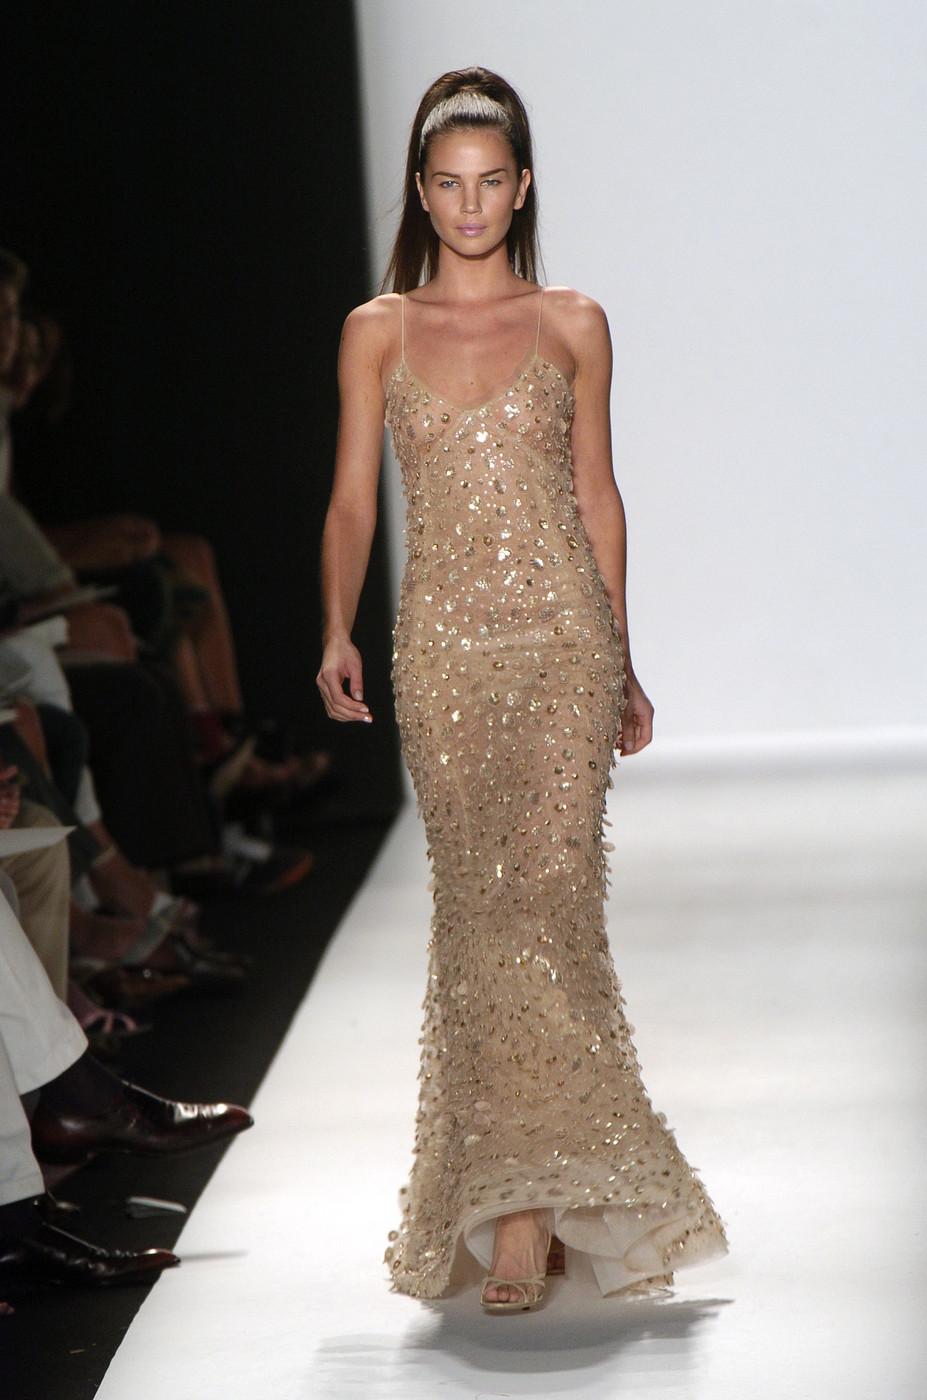 New Oscar de la Renta Nude Sequin Embellished Dress Gown
S/S 2006 Runway Collection
USA size 6 
Same dress was worn by Mischa Barton in the 57th Emmy Awards,  September 2006.
Nominated by Vogue magazine as the best Emmy Awards dress.
Measurements: